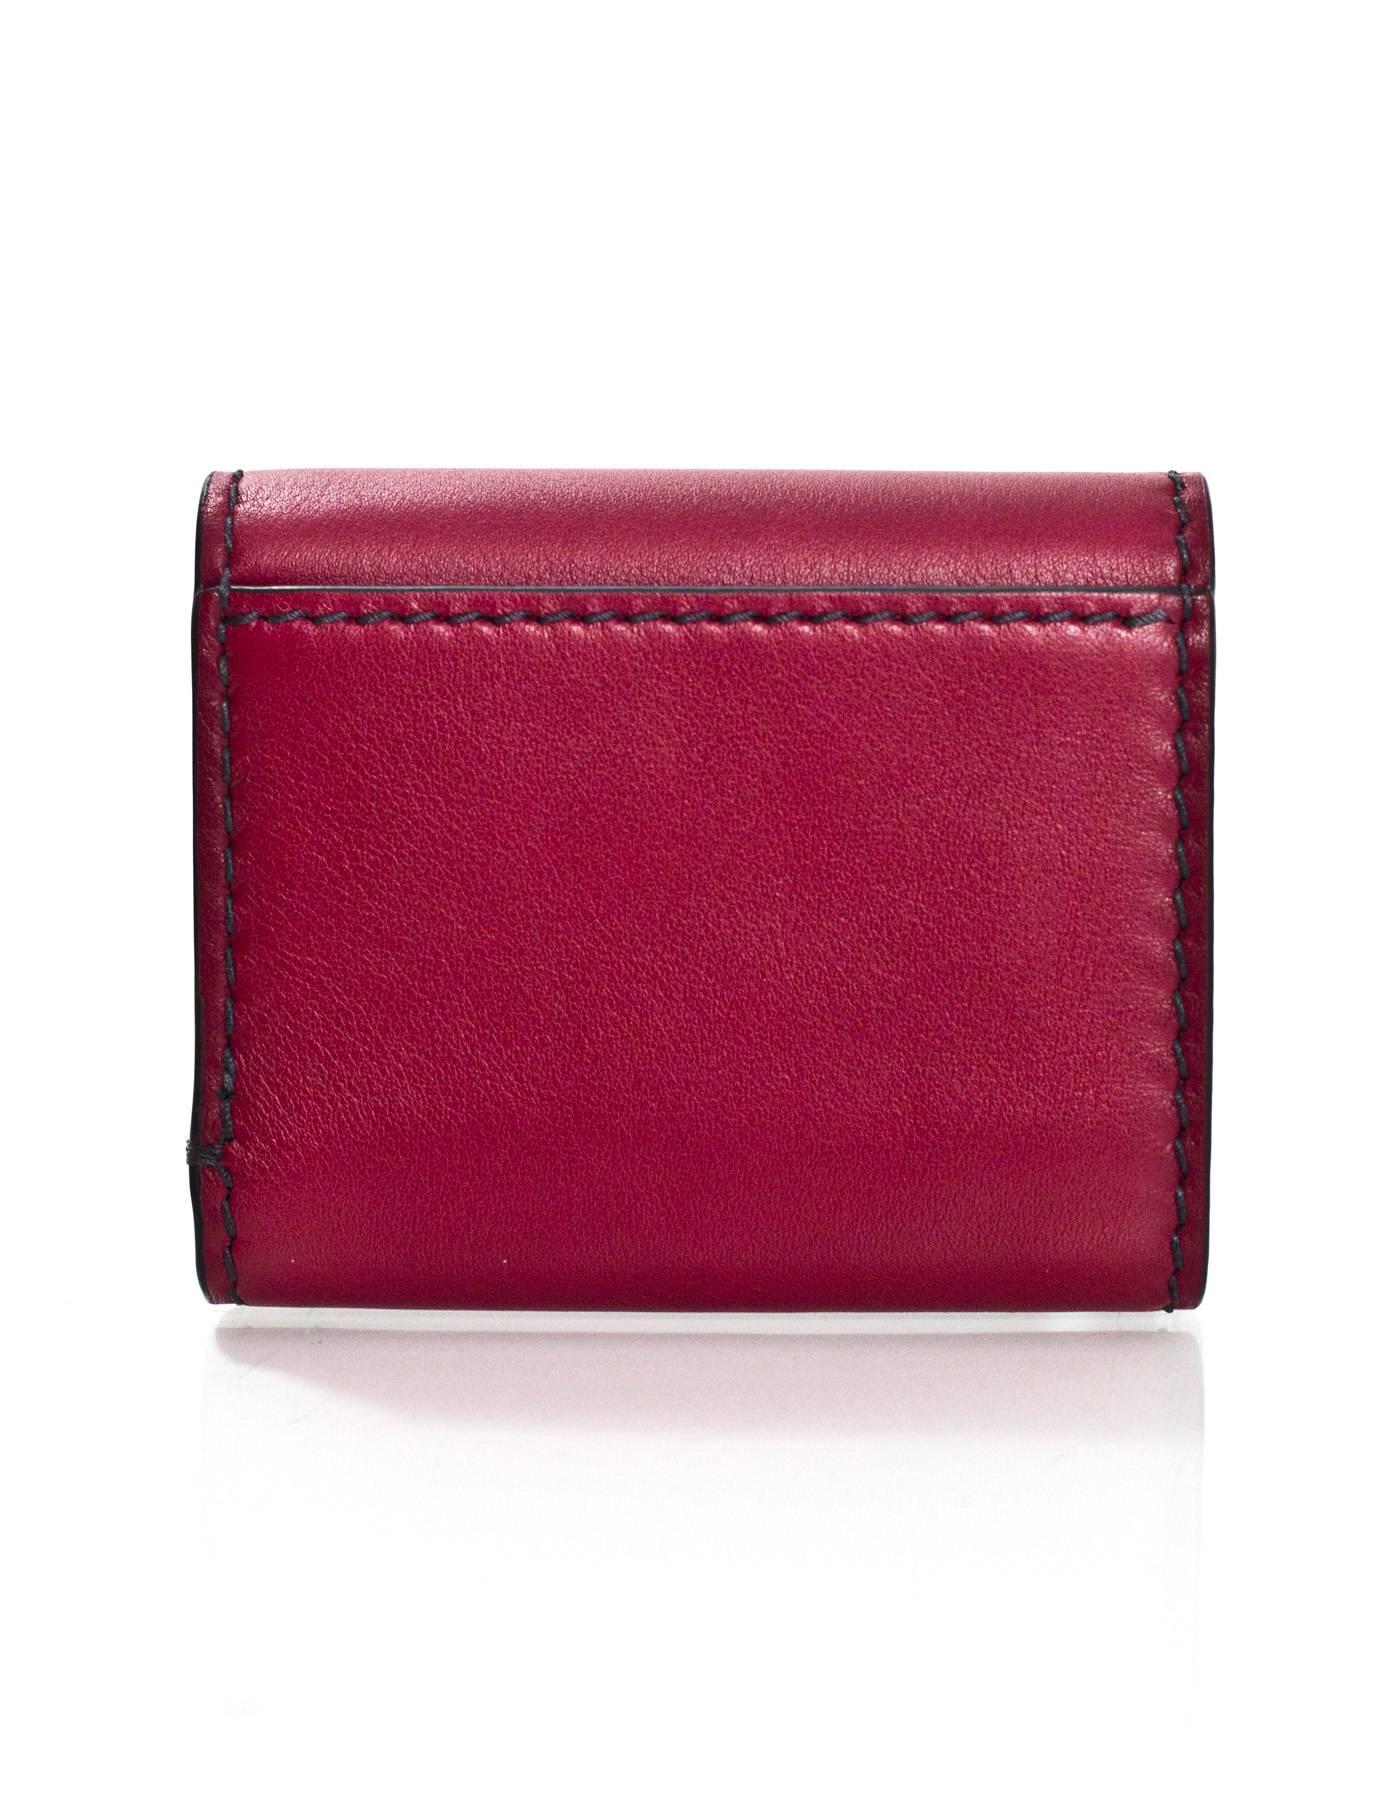 christian dior wallet price list, OFF 